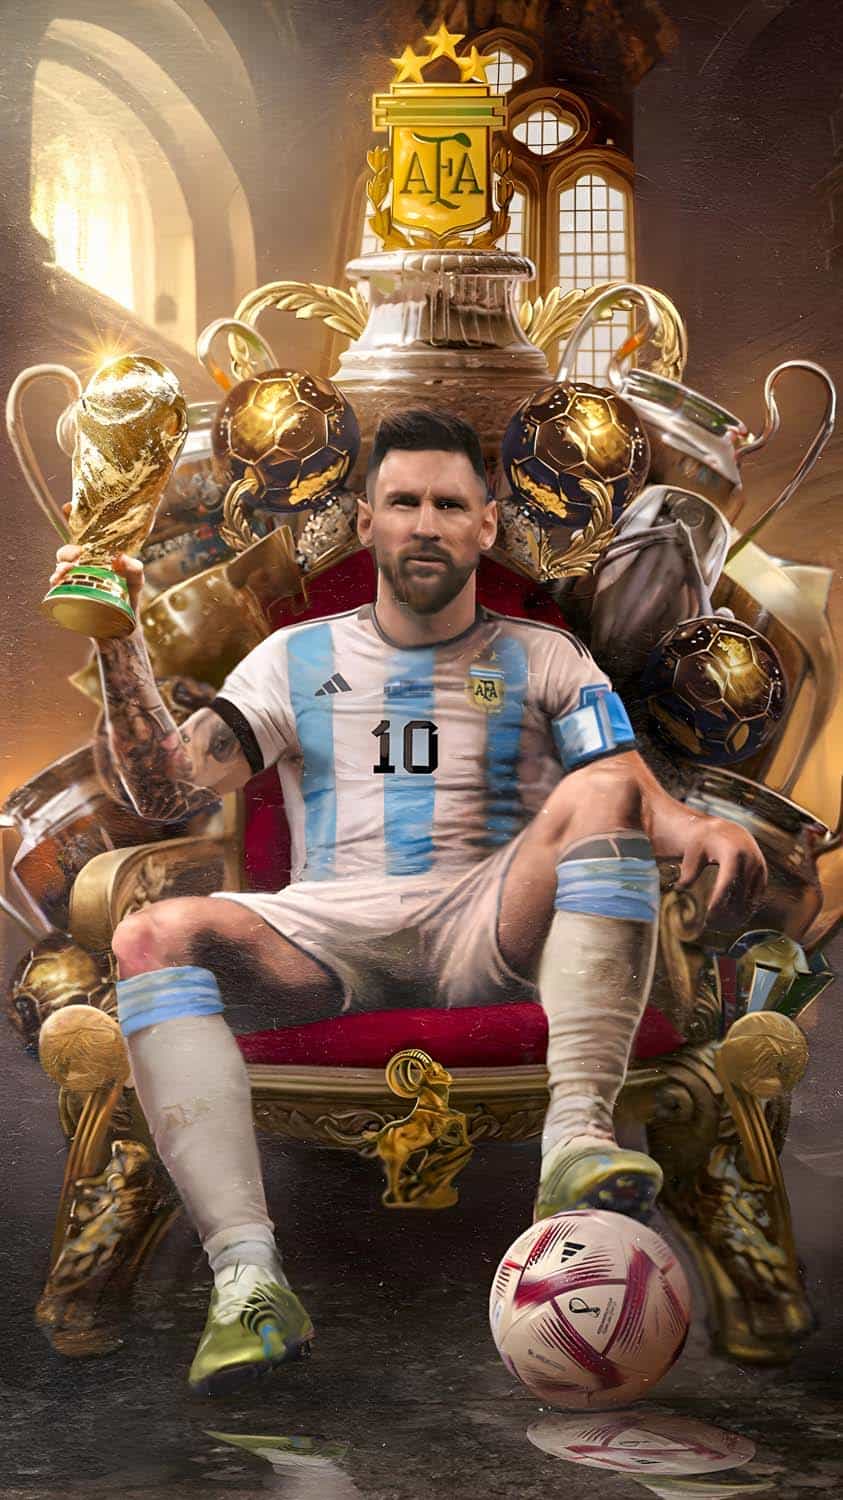 Messi Football King IPhone Wallpaper HD - IPhone Wallpapers ...